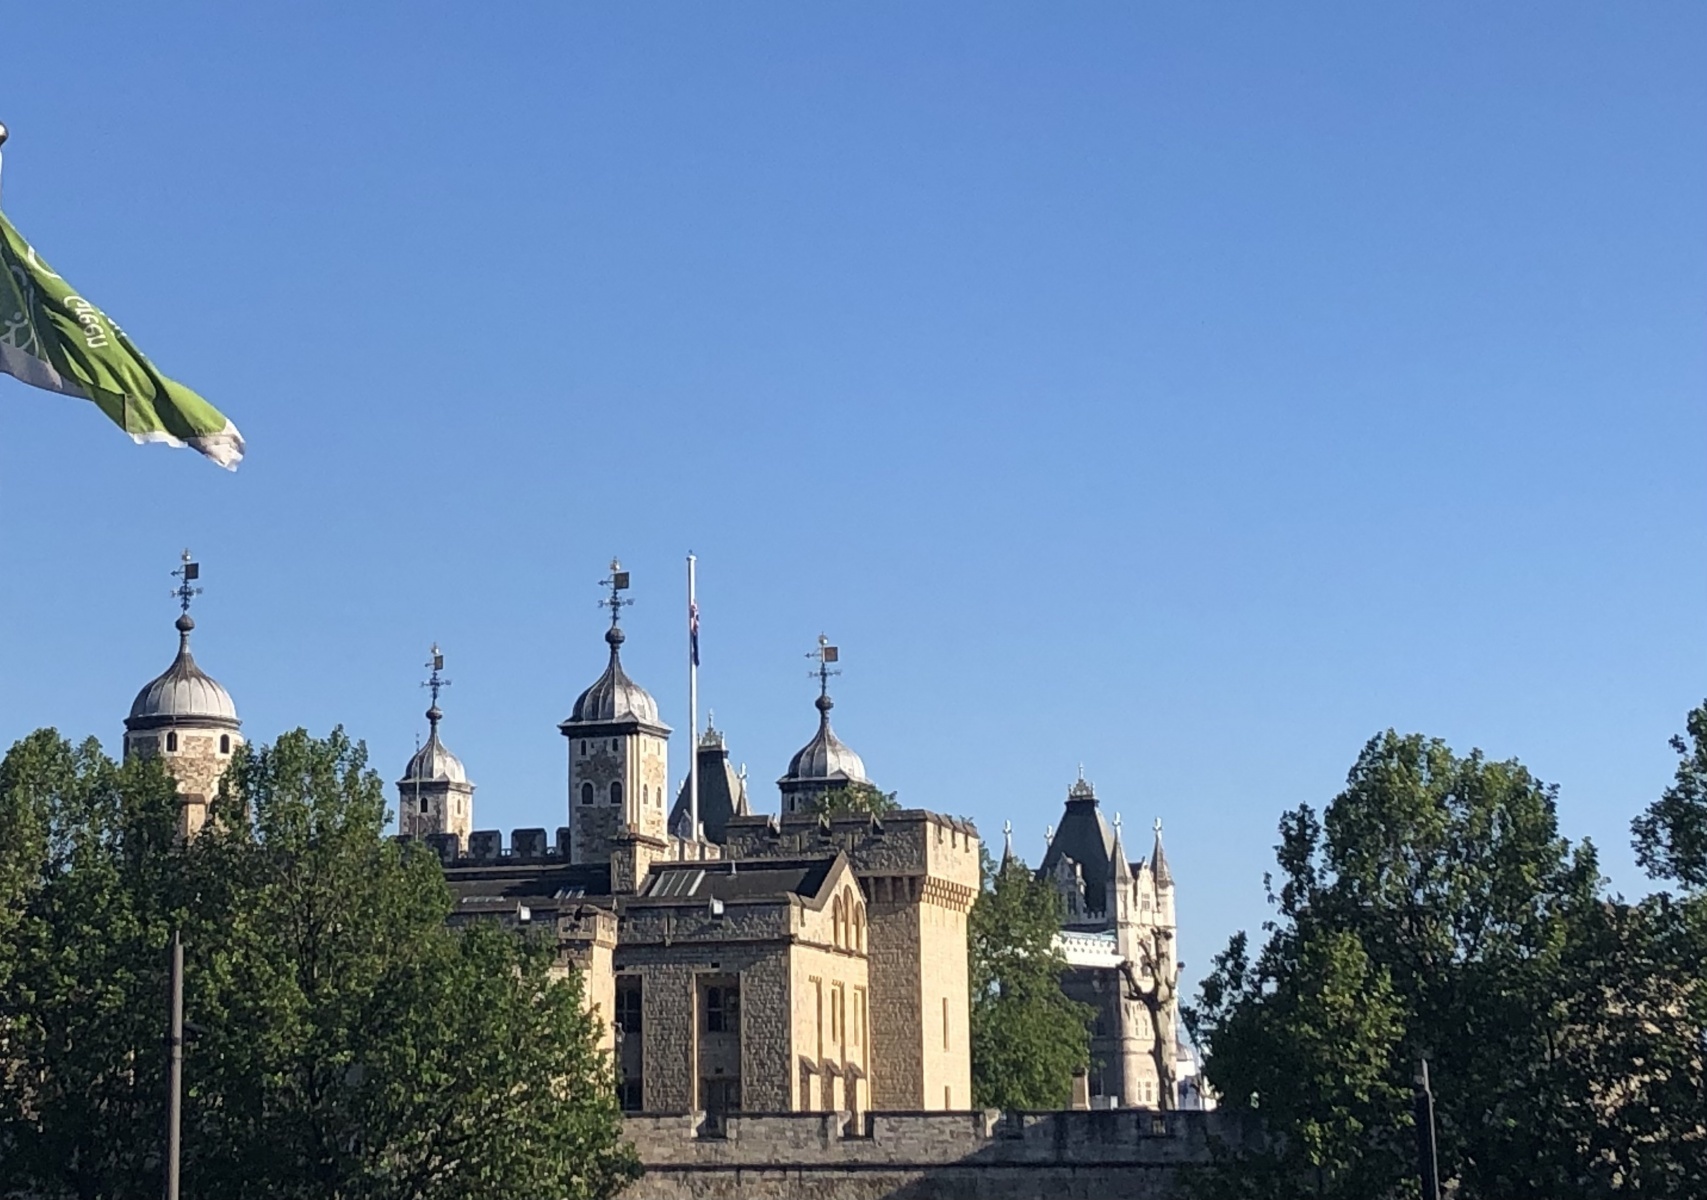 Tower-of-London